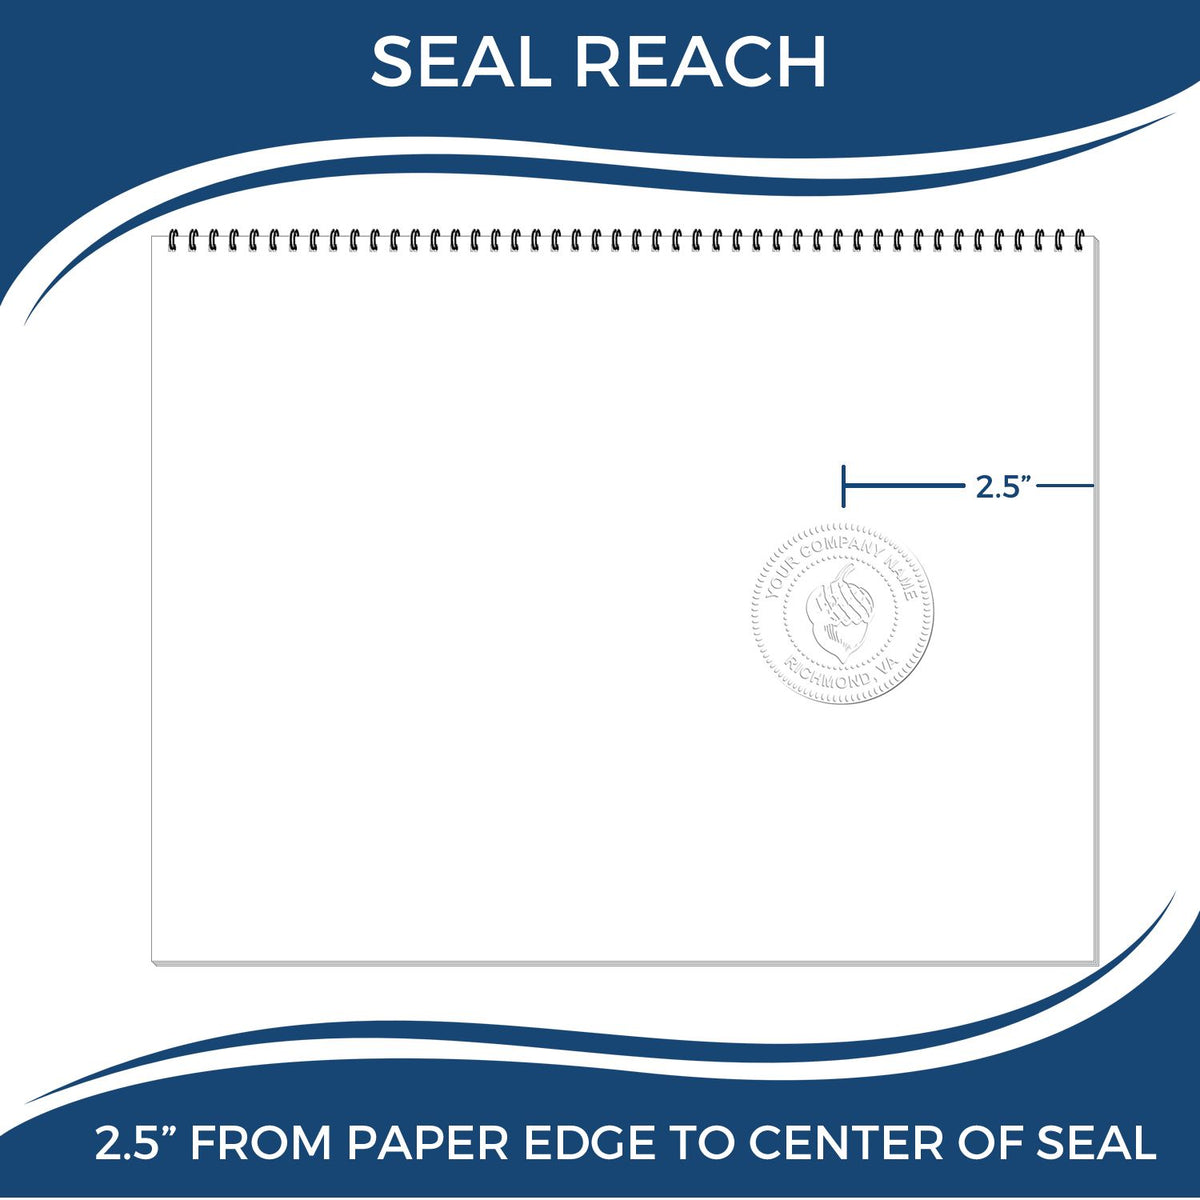 An infographic showing the seal reach which is represented by a ruler and a miniature seal image of the Heavy Duty Cast Iron Virginia Geologist Seal Embosser